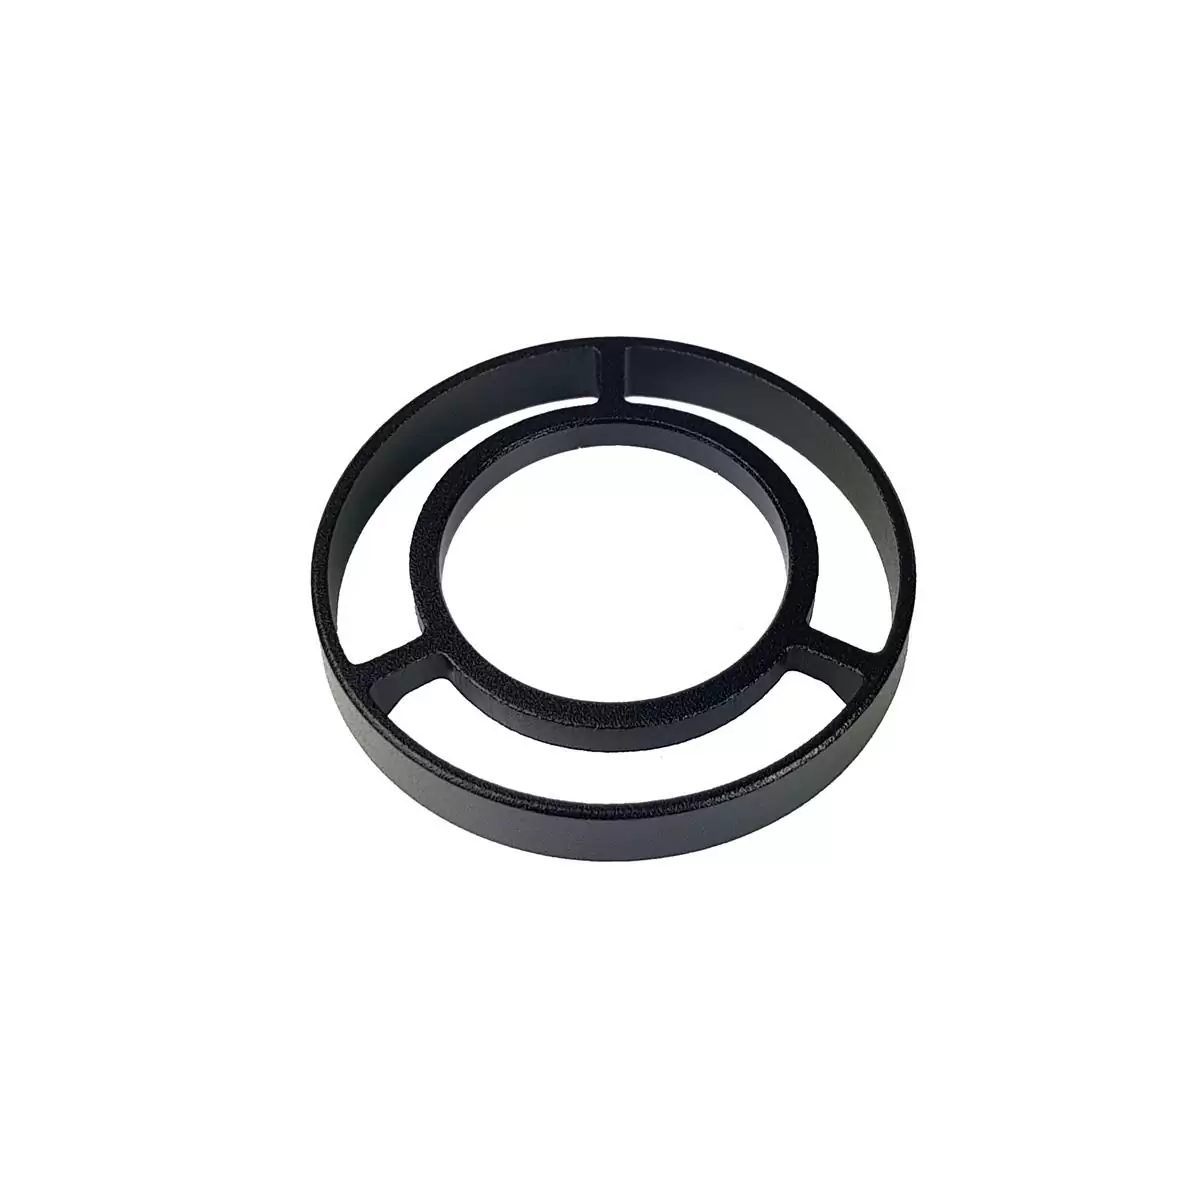 Oversize spacer tapered 1-1/8'' 5mm for Acros headset - image